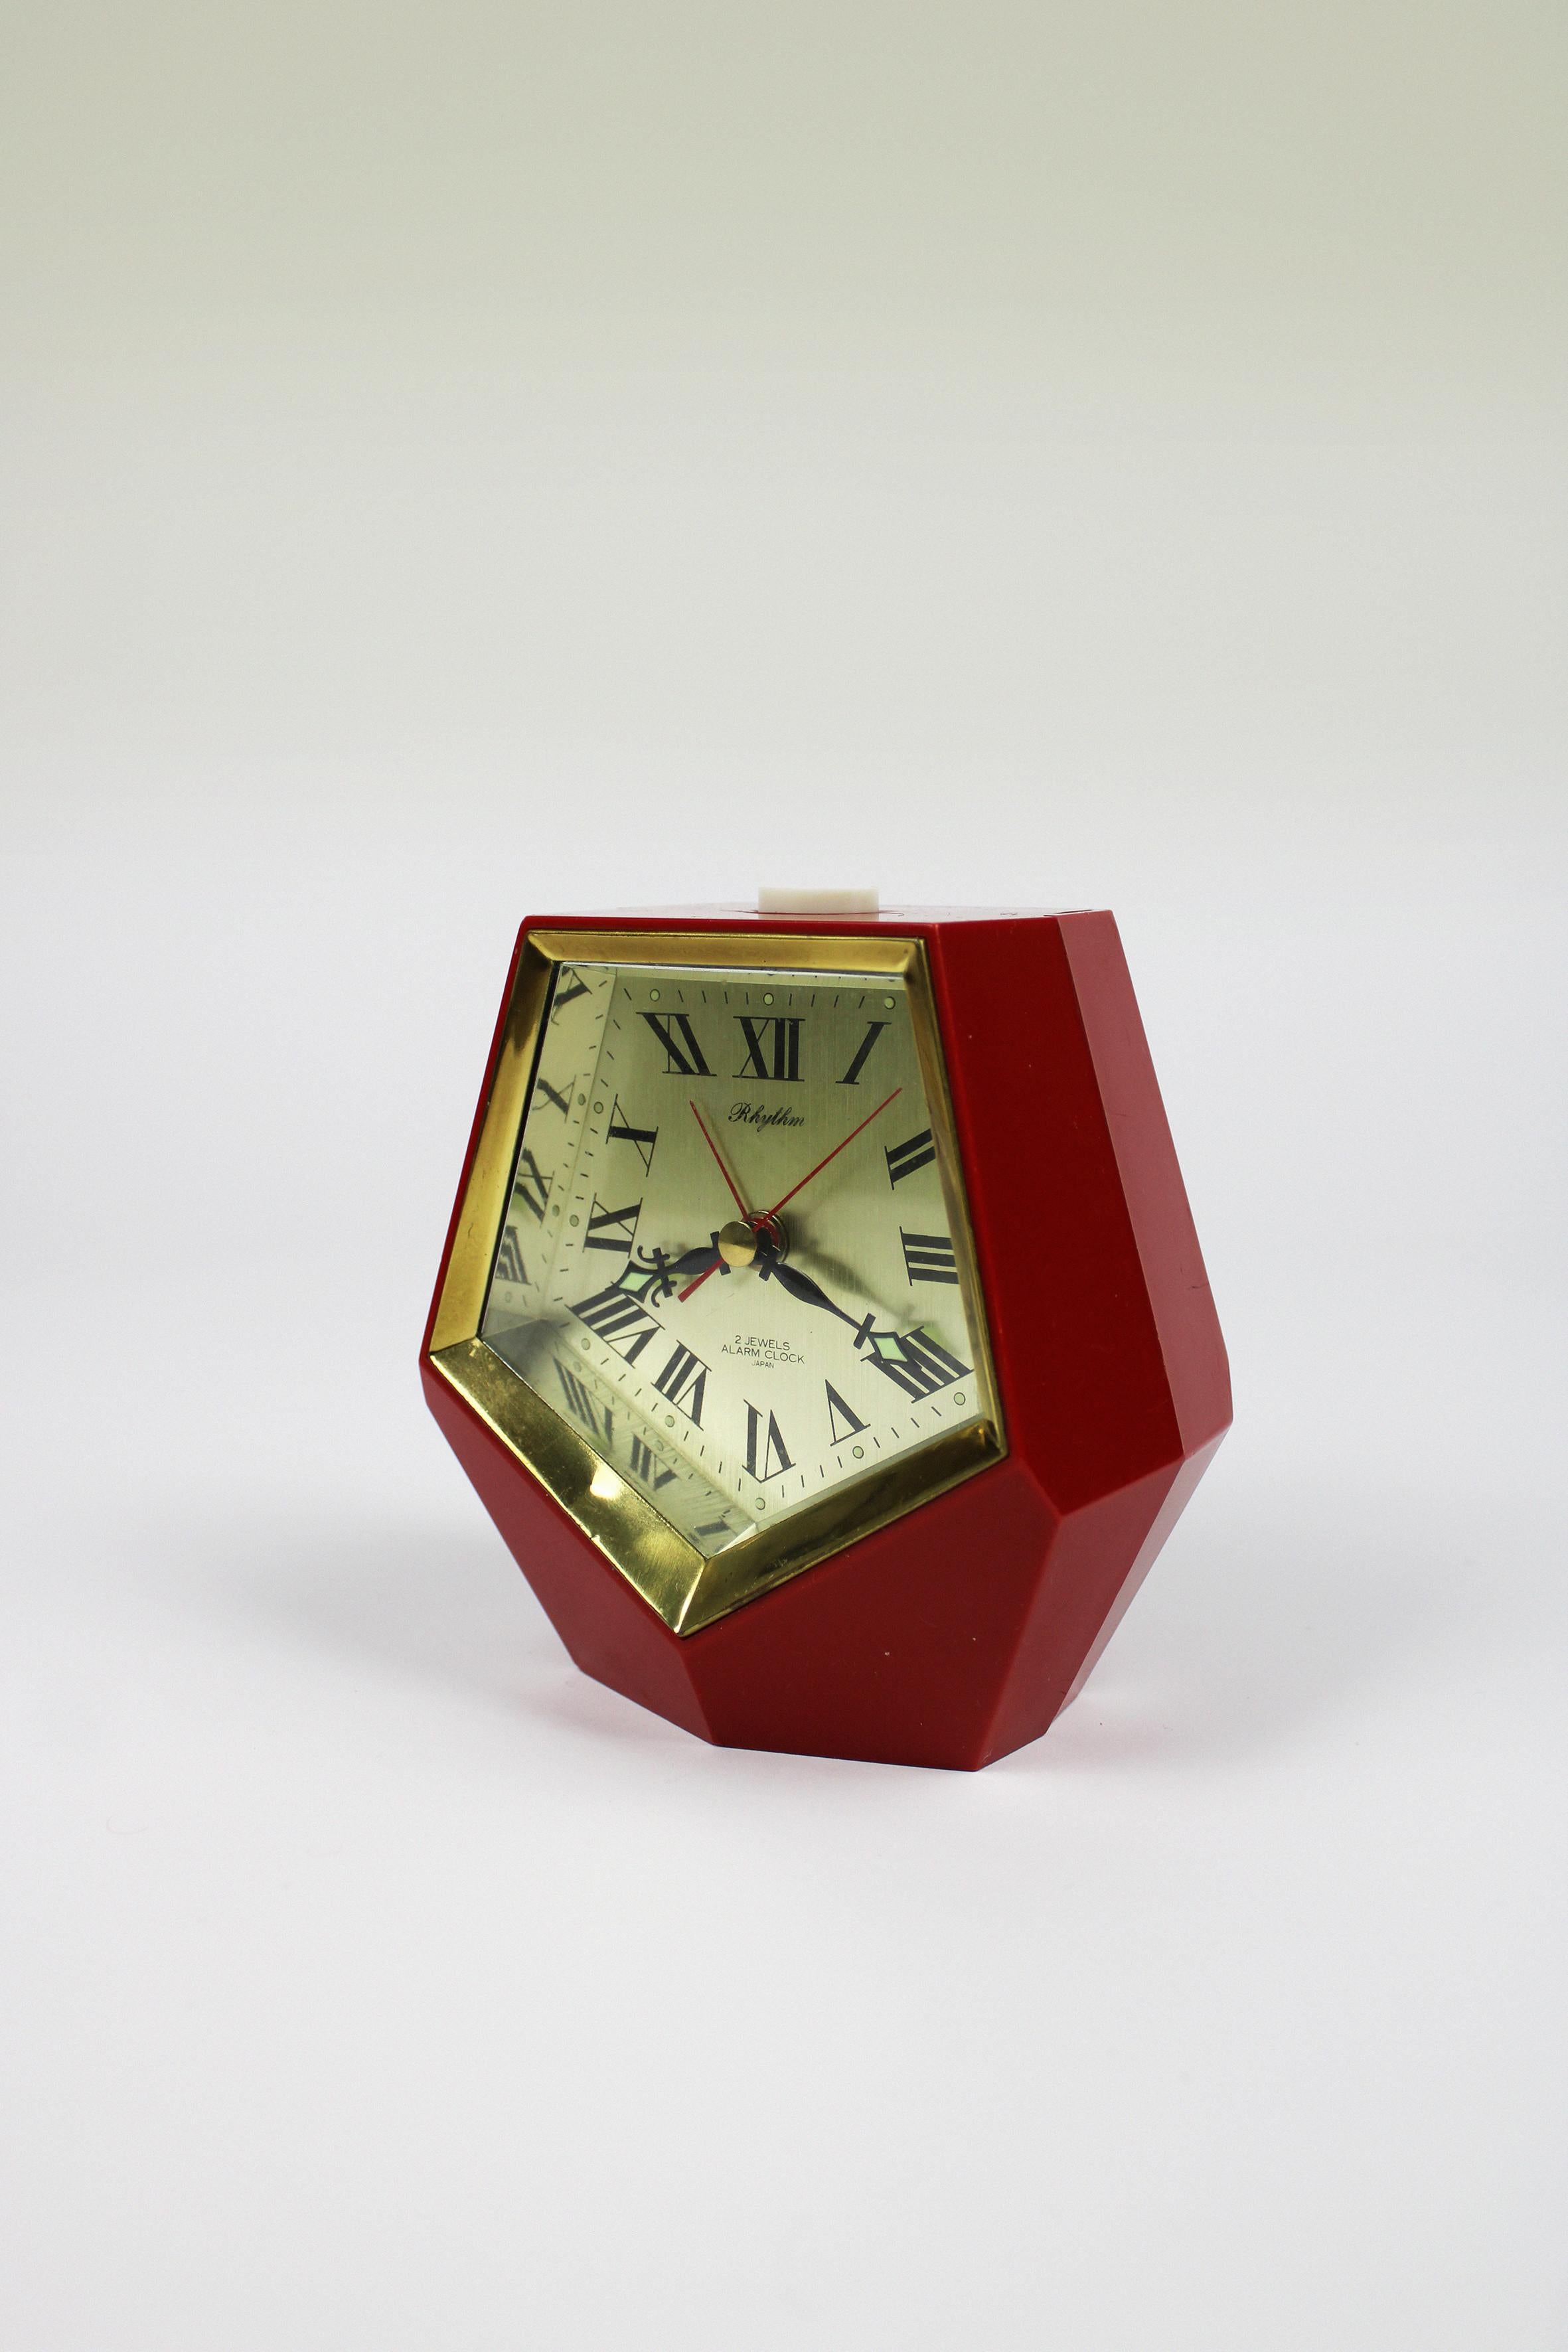 Immerse yourself in the charm of this exceptionally rare and stylish vintage alarm clock crafted by Rhythm. Its unique hexadecahedron shape and the timeless appeal of Roman numerals seamlessly integrate into any space, offering a distinctive touch